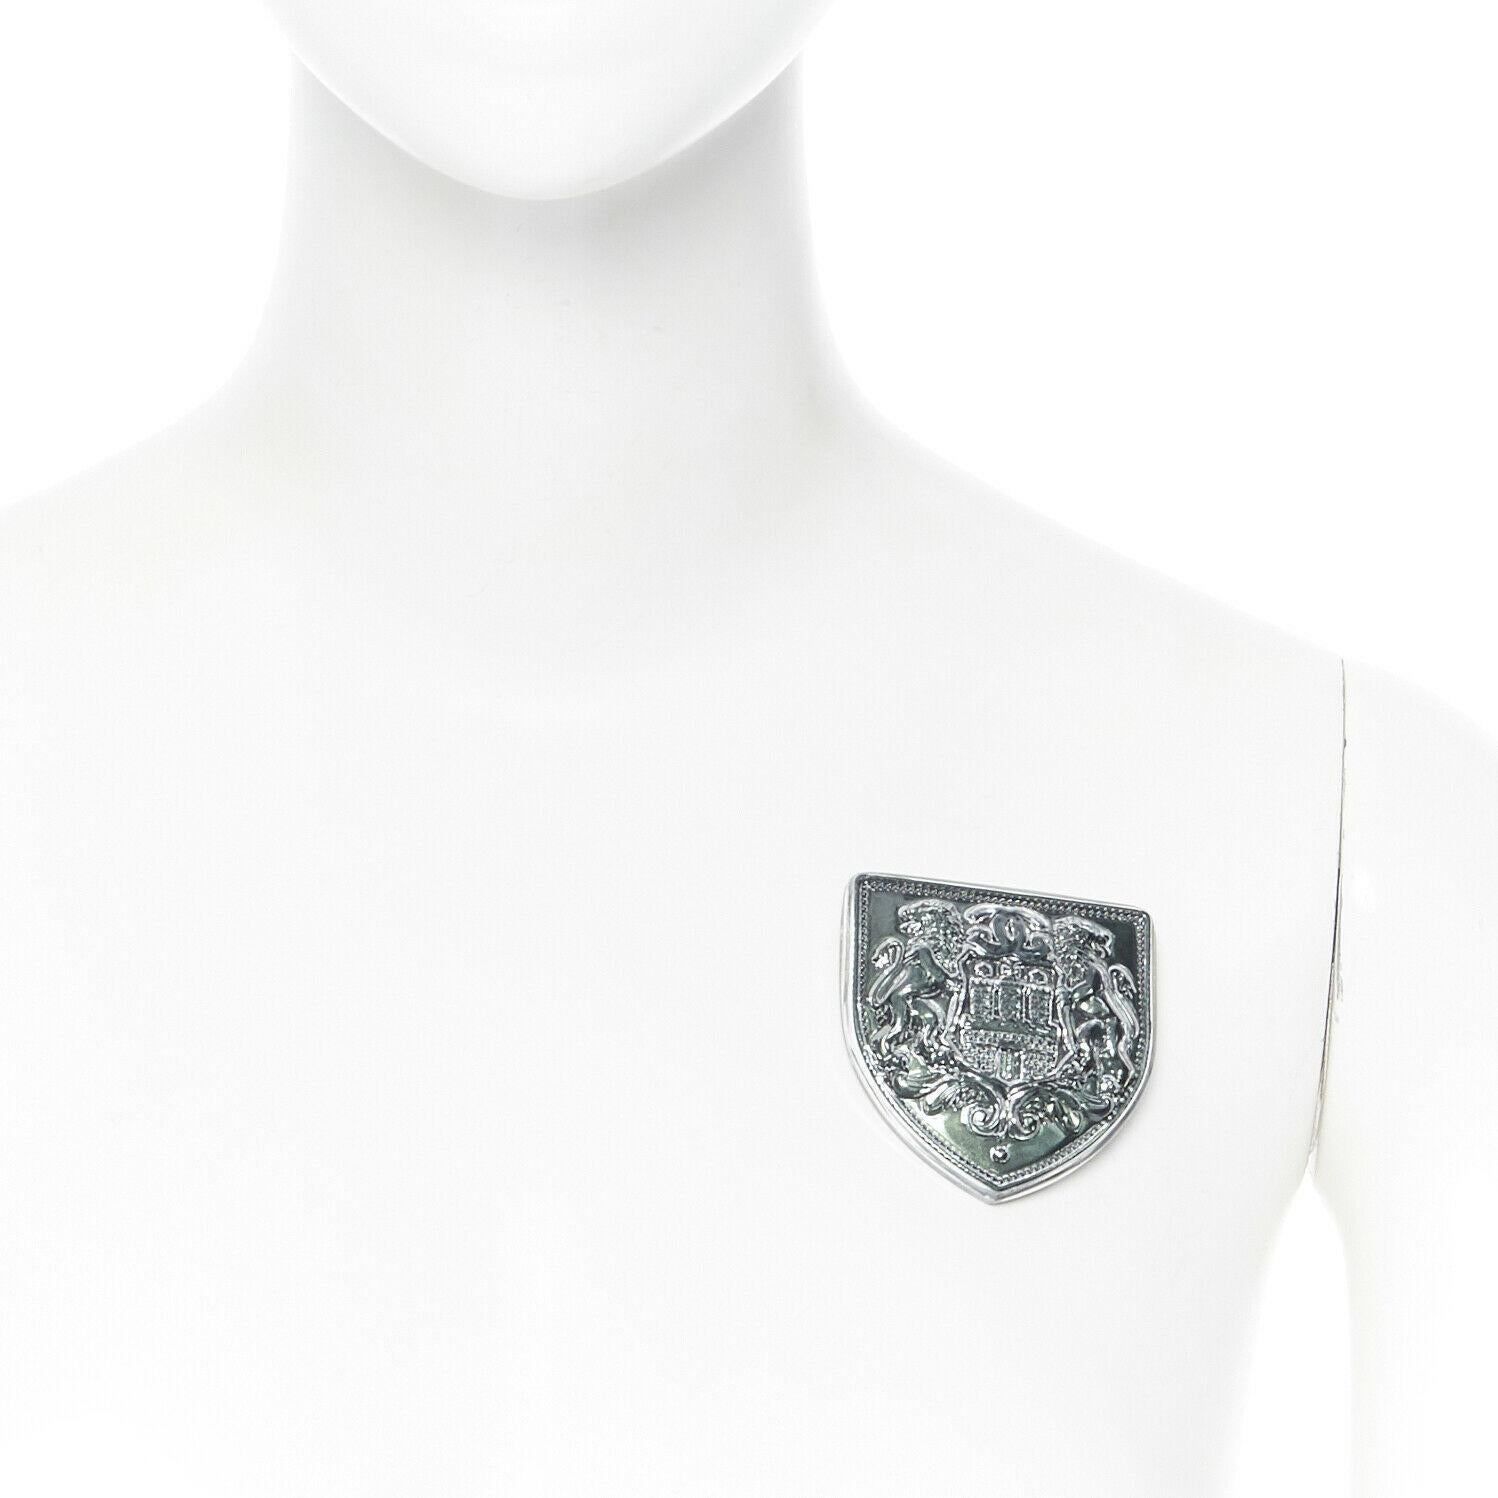 new CHANEL KARL LAGERFELD green clear plastic military resin shield badge brooch
Brand: CHANEL
Designer: Karl Lagerfeld
Model Name / Style: Resin brooch
Material: Plastic; Resin
Color: Green
Pattern: Solid
Extra Detail: Brown leather floral petal